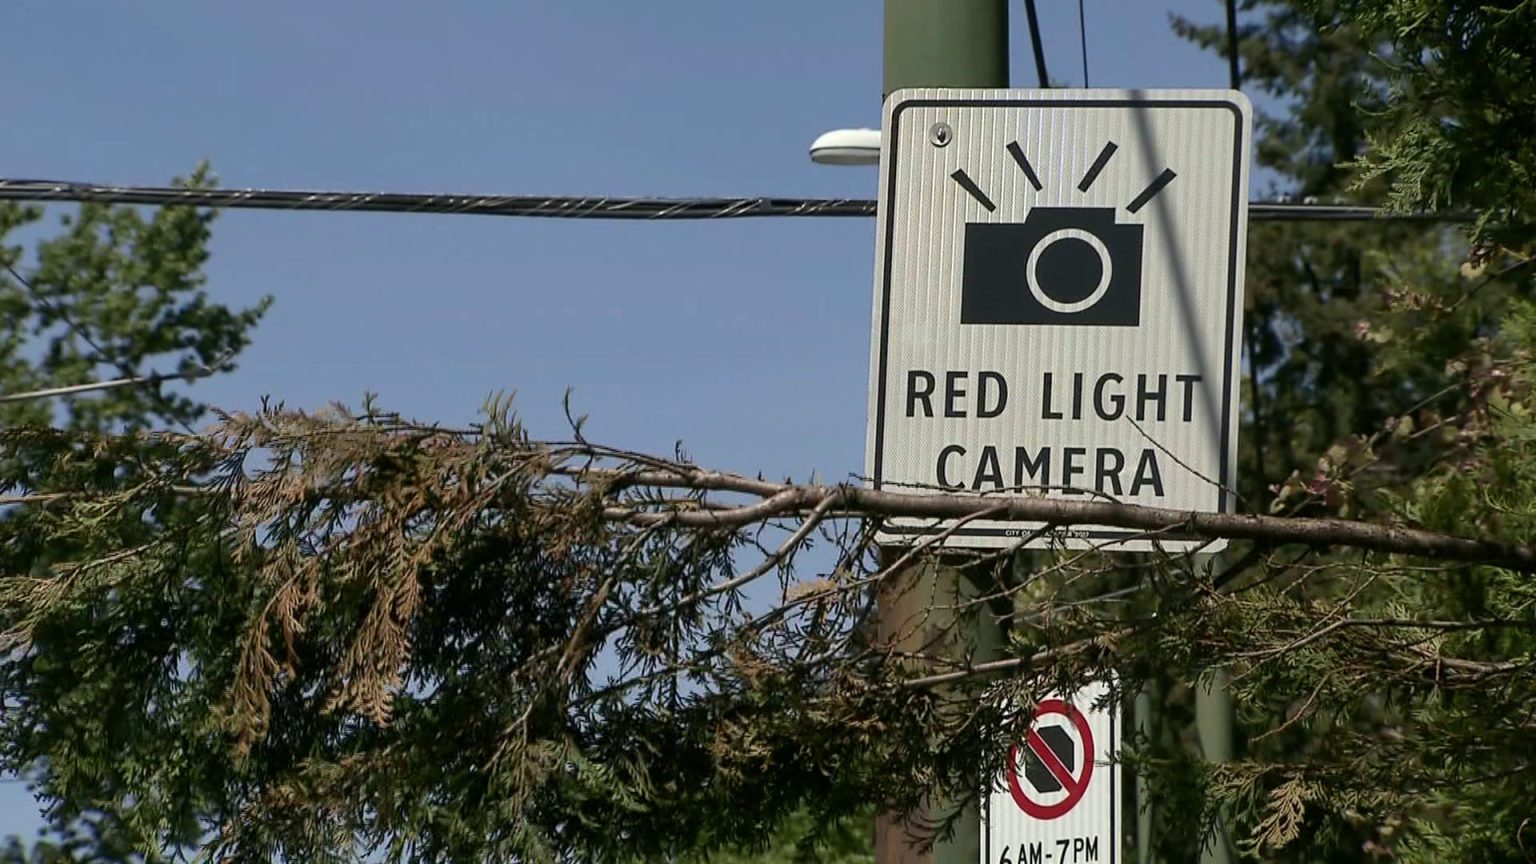 Motion on speed, red light cameras before Vancouver council today